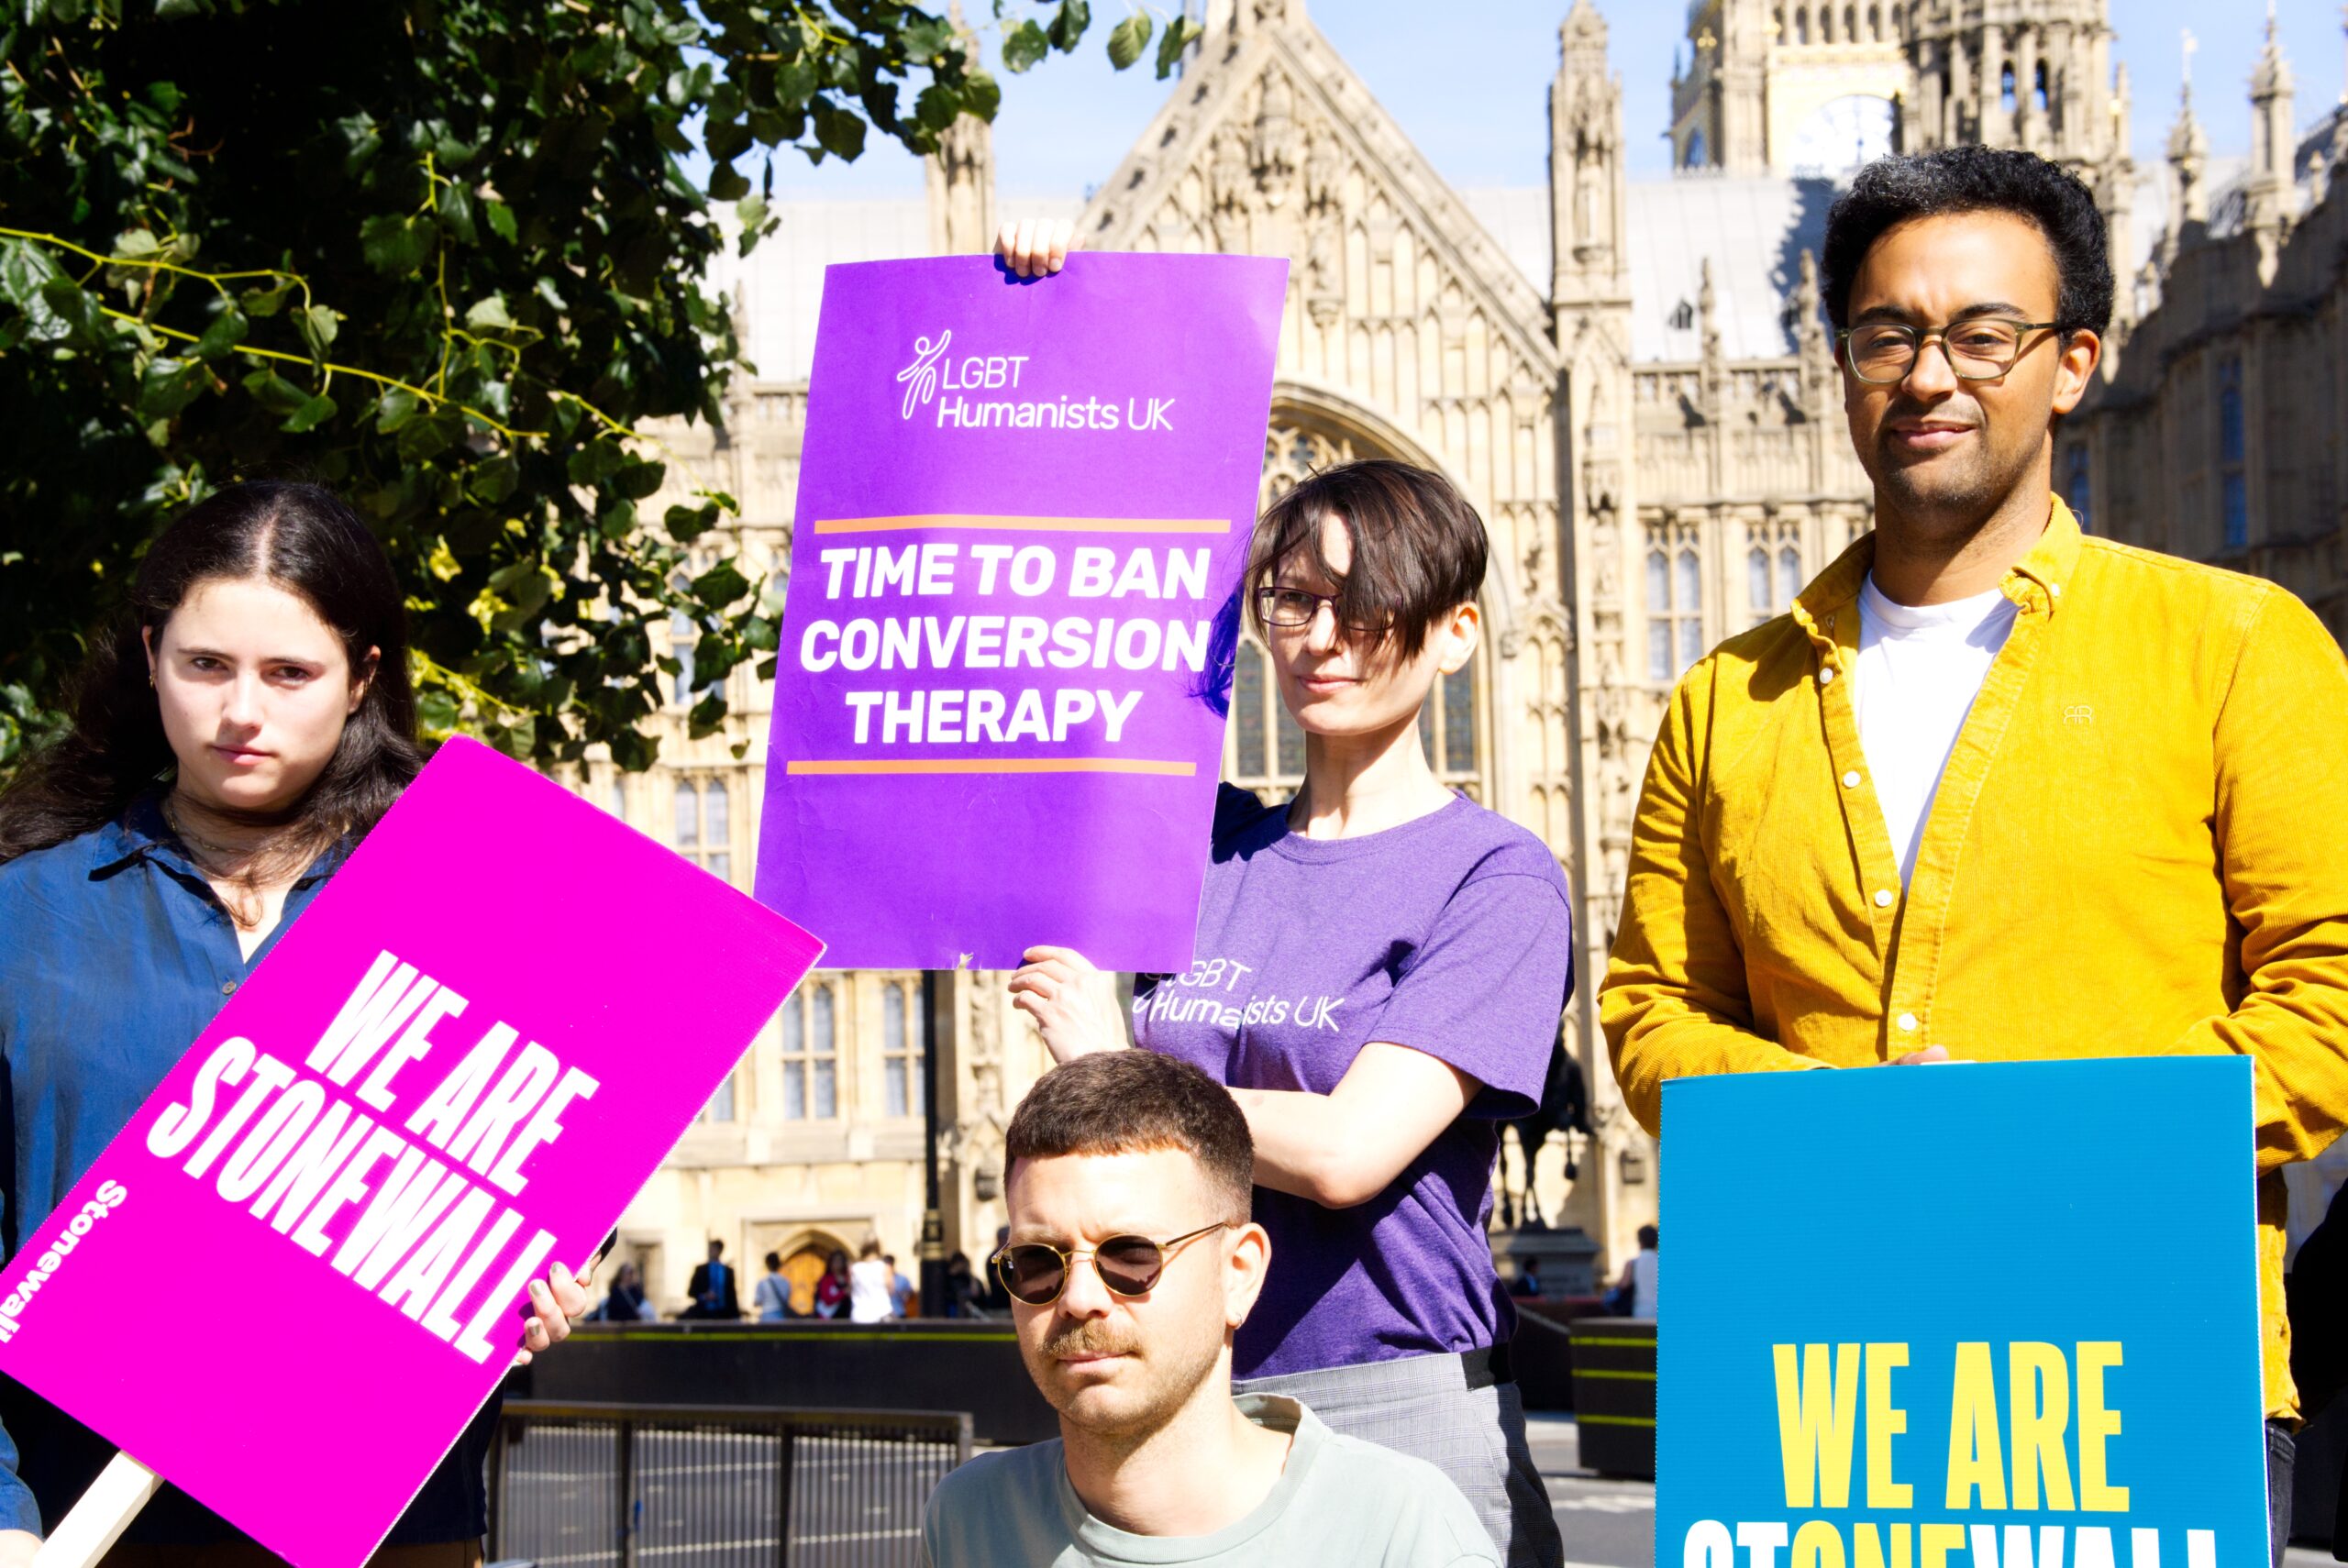 Fighting back: humanist action against ‘conversion therapy’